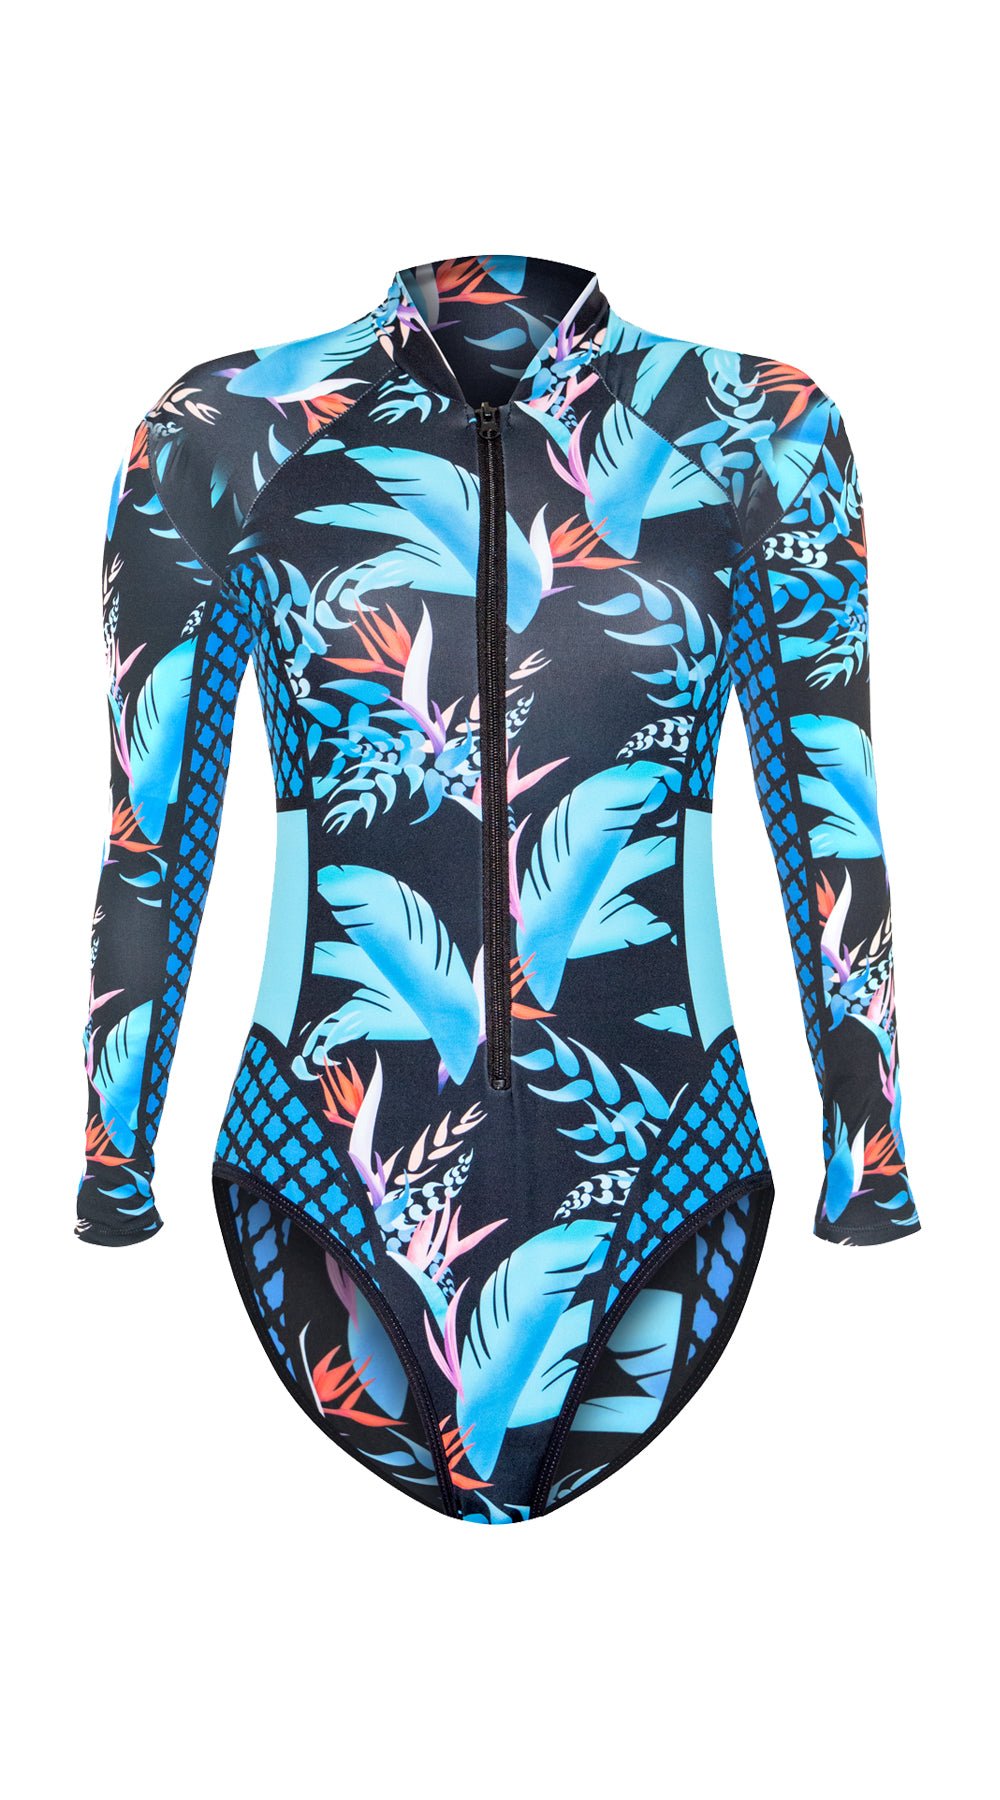 Essentials Blue Multiprint Long Sleeve Suit - Bare Essentials
One Piece Swimsuits